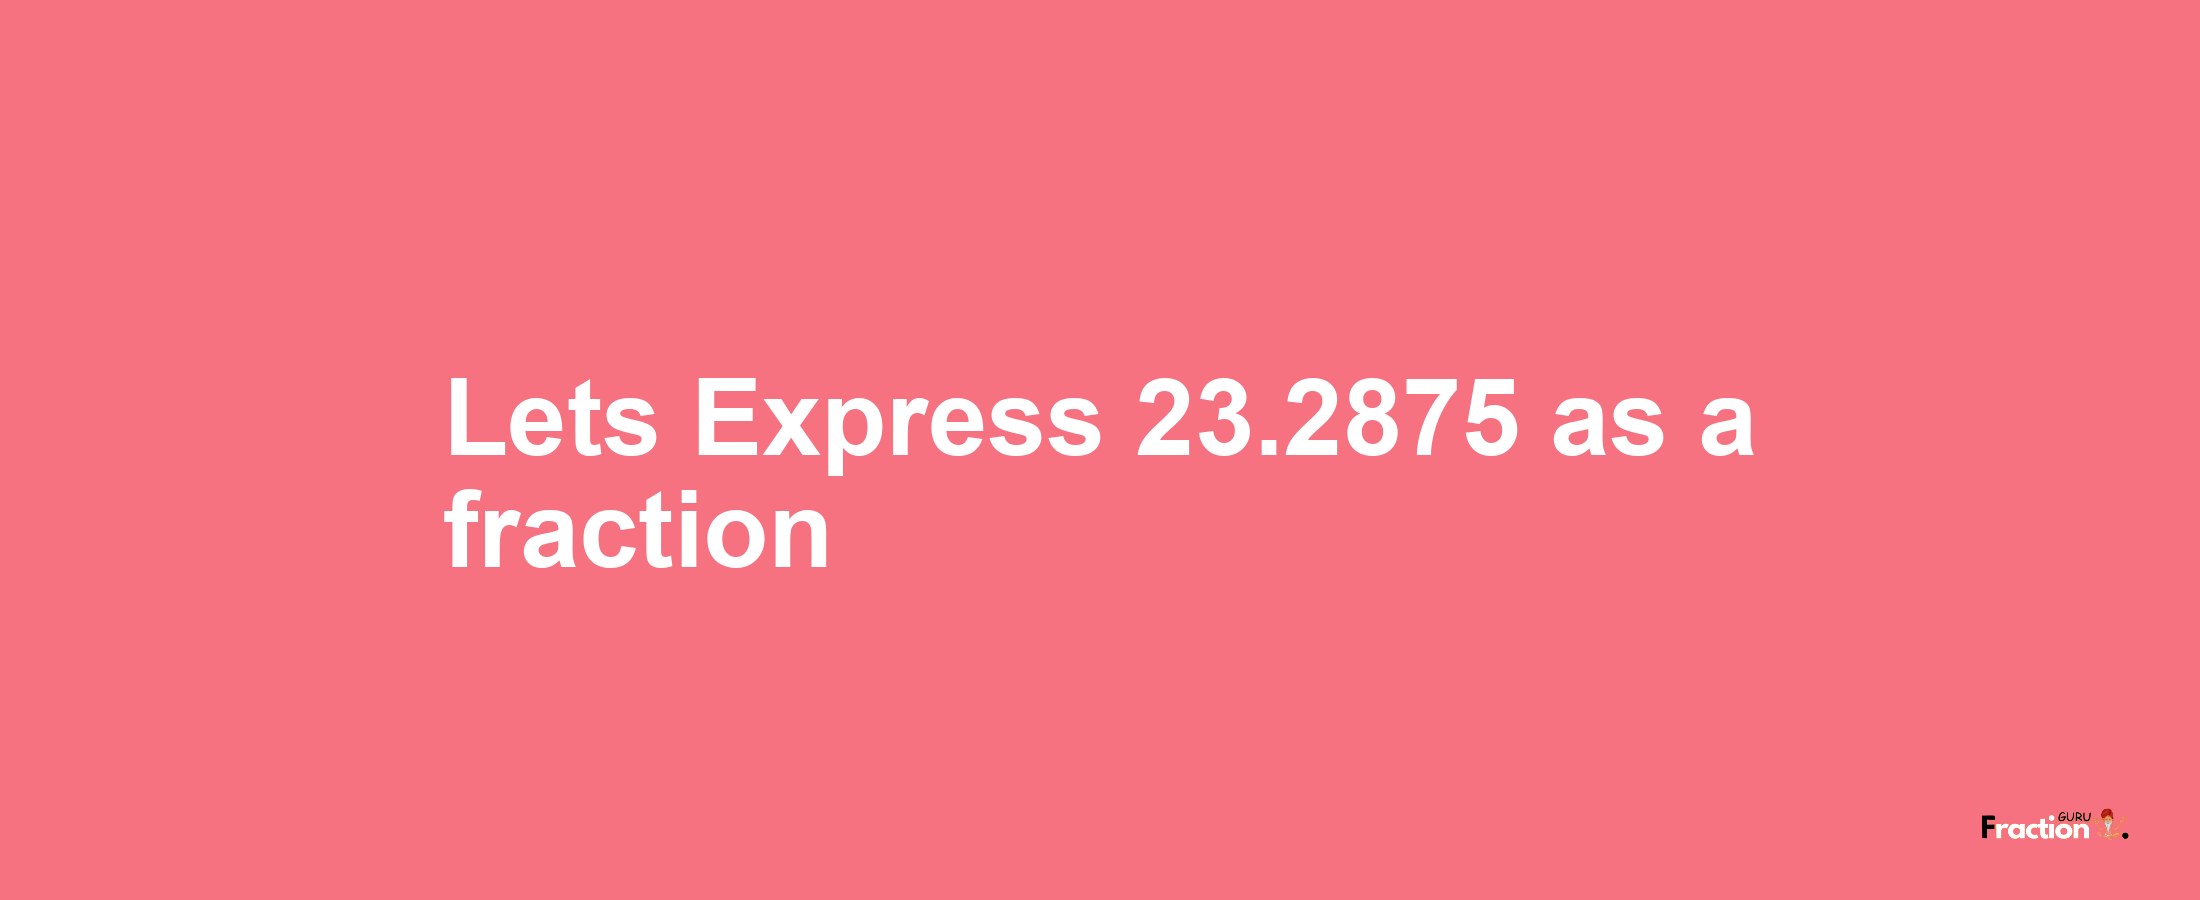 Lets Express 23.2875 as afraction